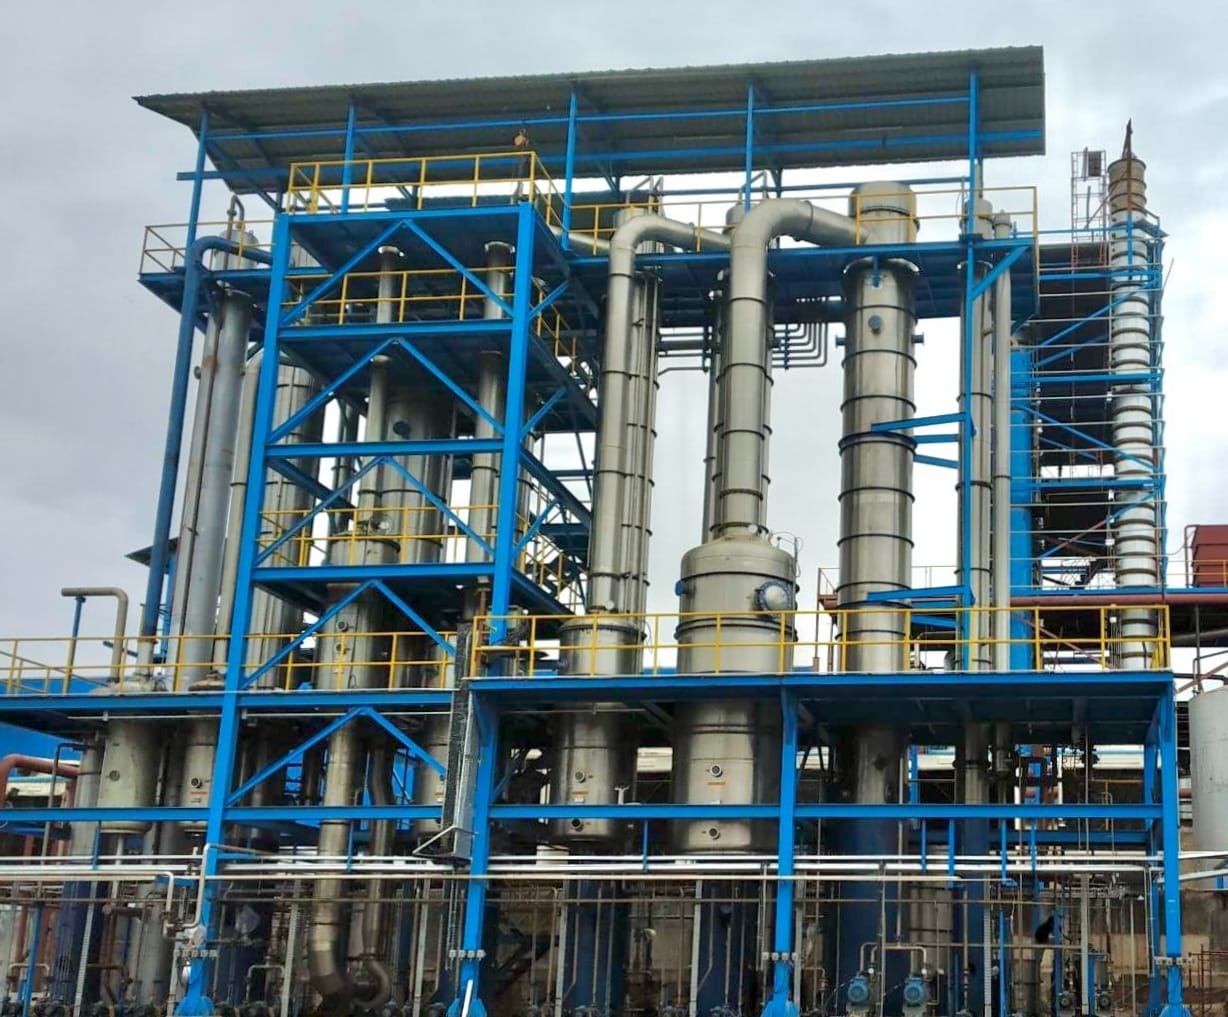 We have established phenomenal design and process expertise, as well as proficiency in manufacturing and execution of turnkey ZLD projects. With the most efficient plants in the market, we have received several awards for our innovative Zero Liquid Discharge (ZLD) technologies and their equally innovative application to a range of industries facing serious water pollution issues.